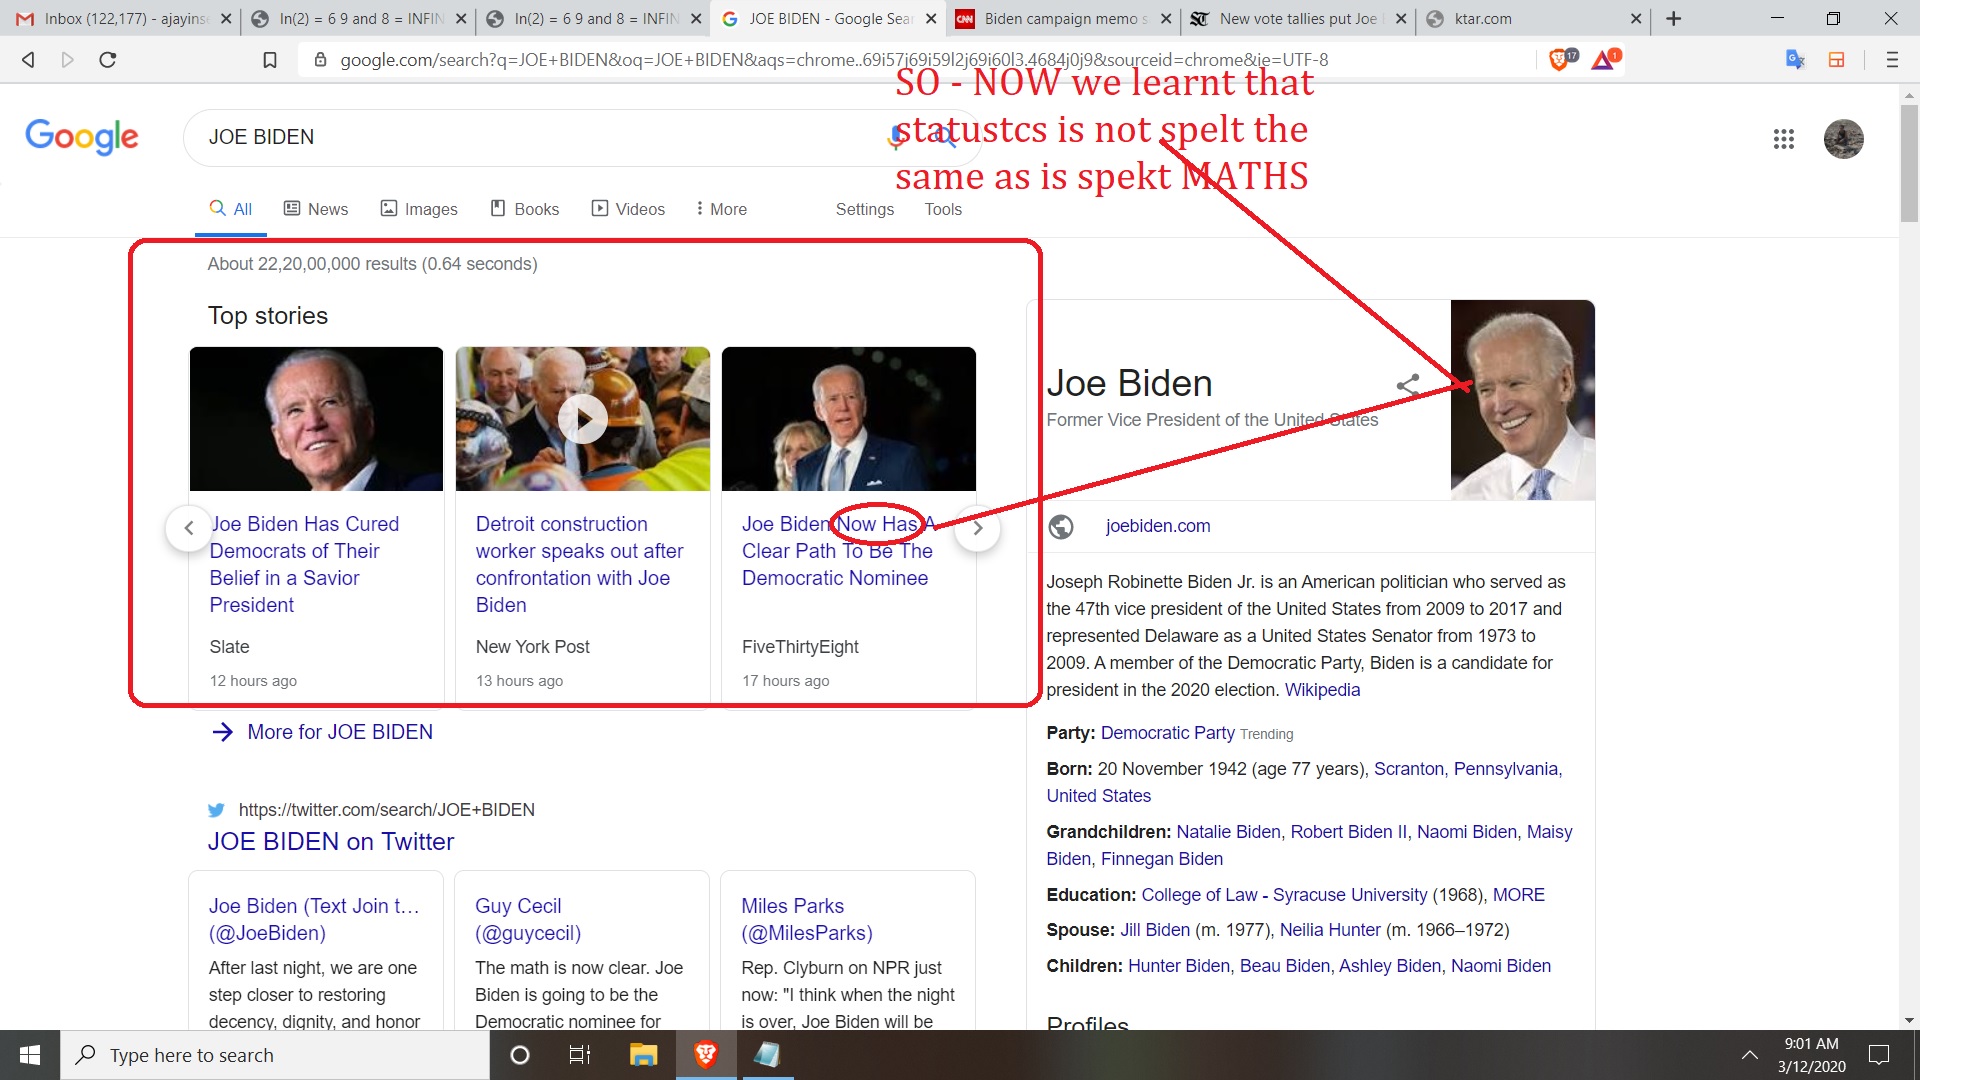 subject-jode-biden-and-nate-silver-and-whats-the-difference-and-role-of-maths-versus-sattistics